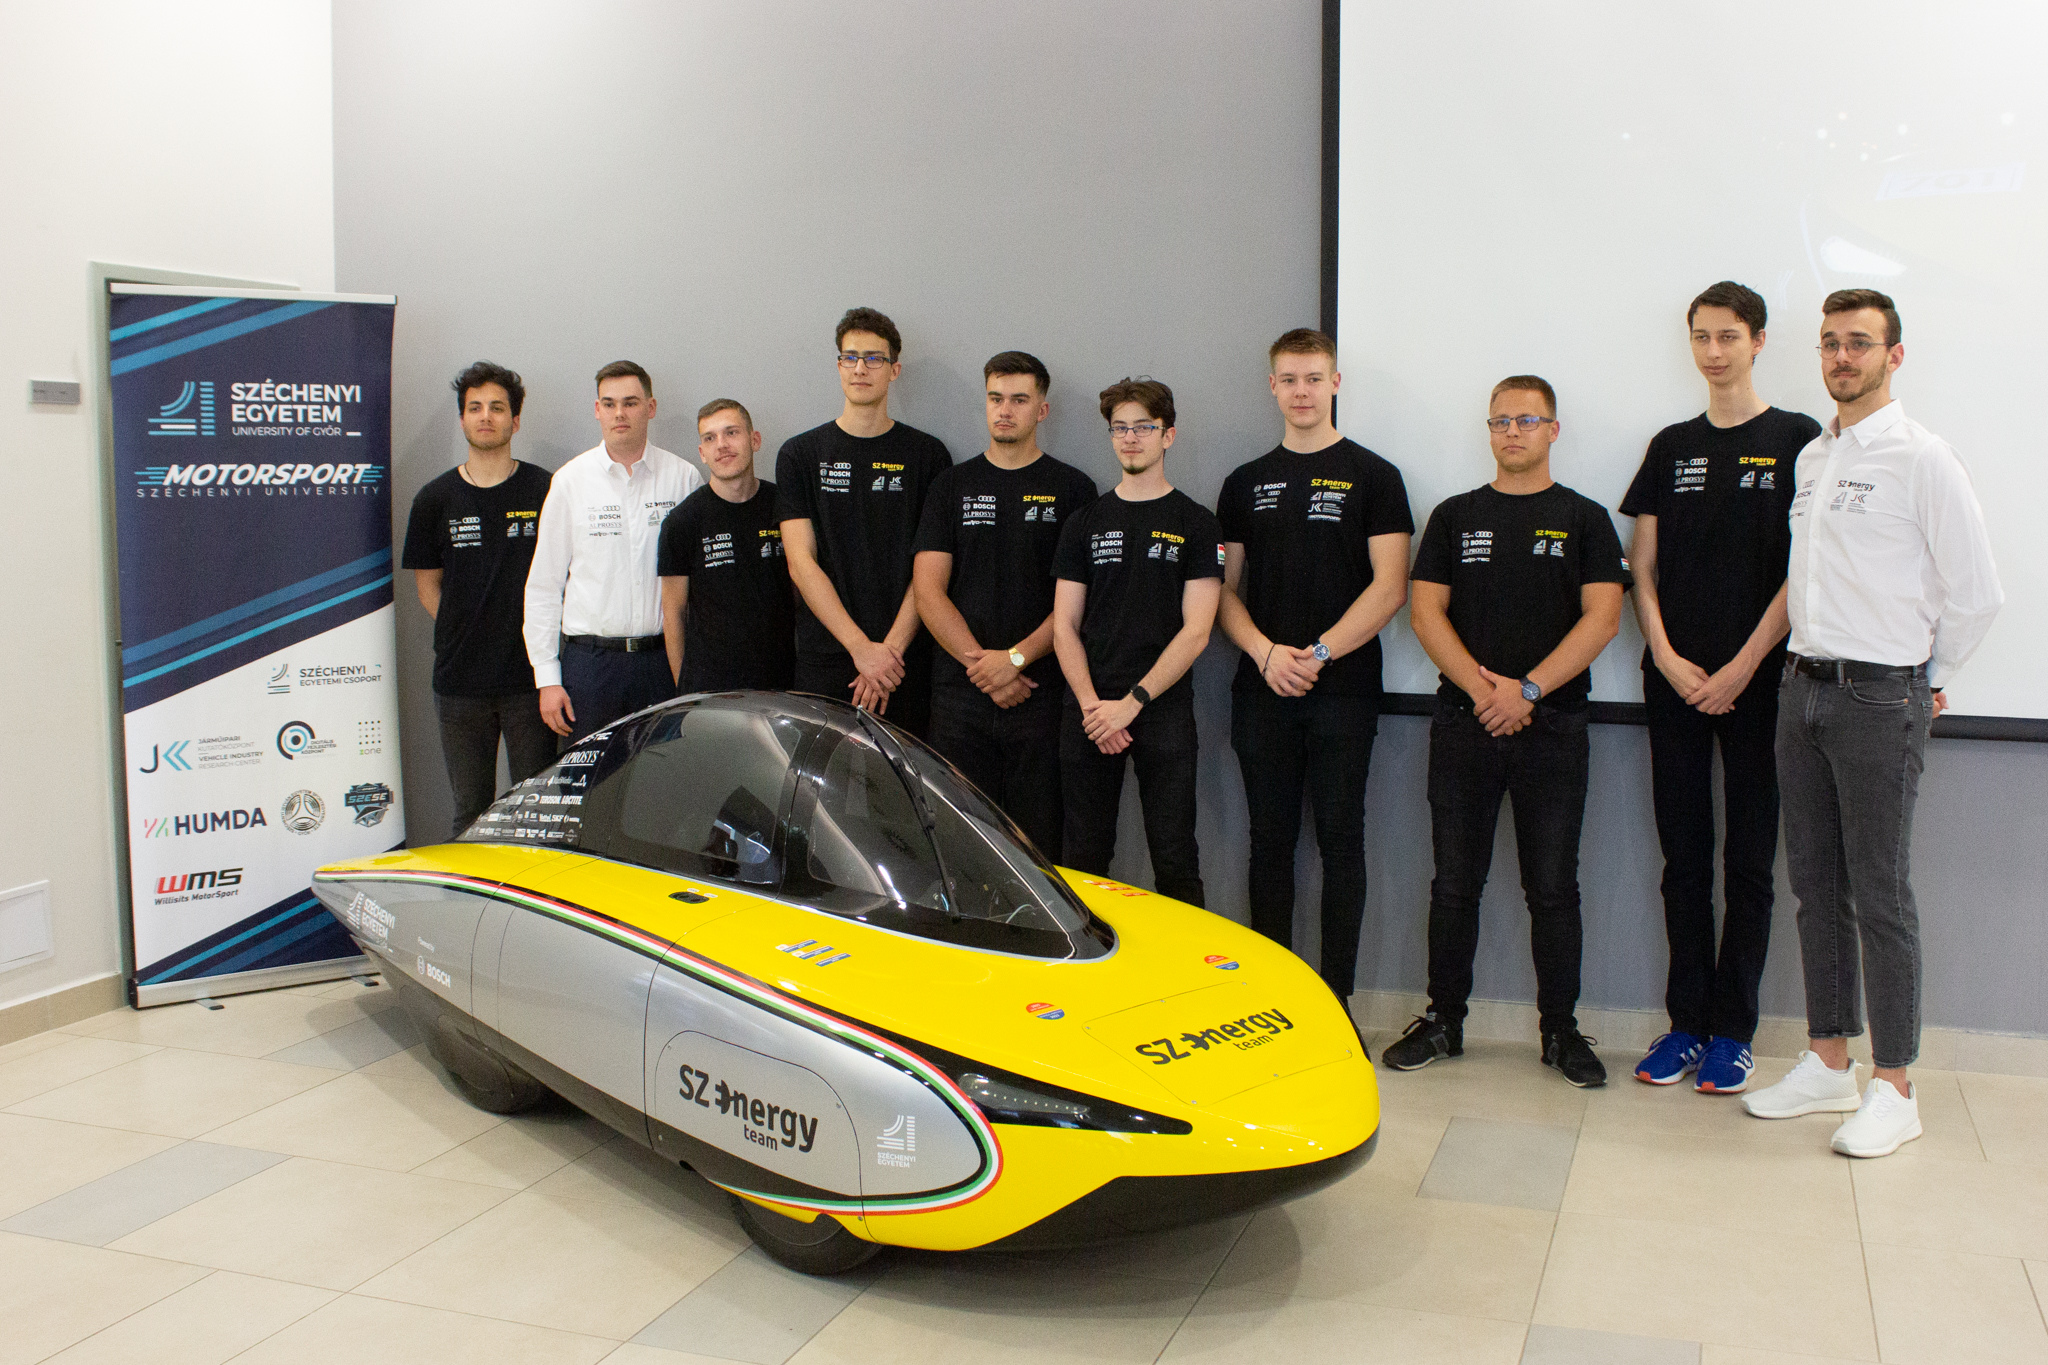 Members of the SZEnergy Team with this year's car 